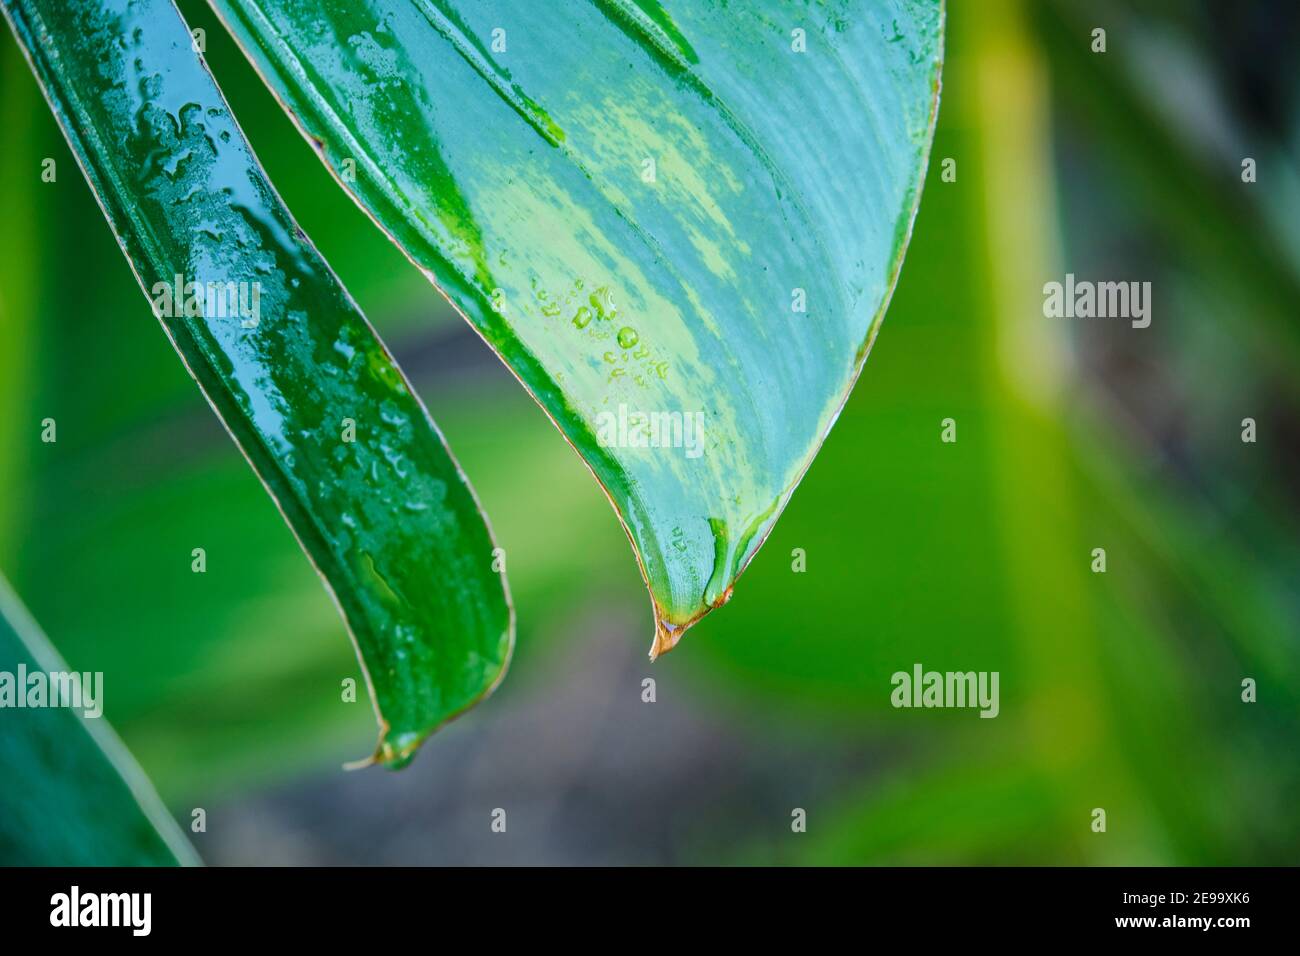 Detail of tropical vegetation after rain, drops running down the leaves. Scene of freshness and peace in nature. Image with copy space. Stock Photo